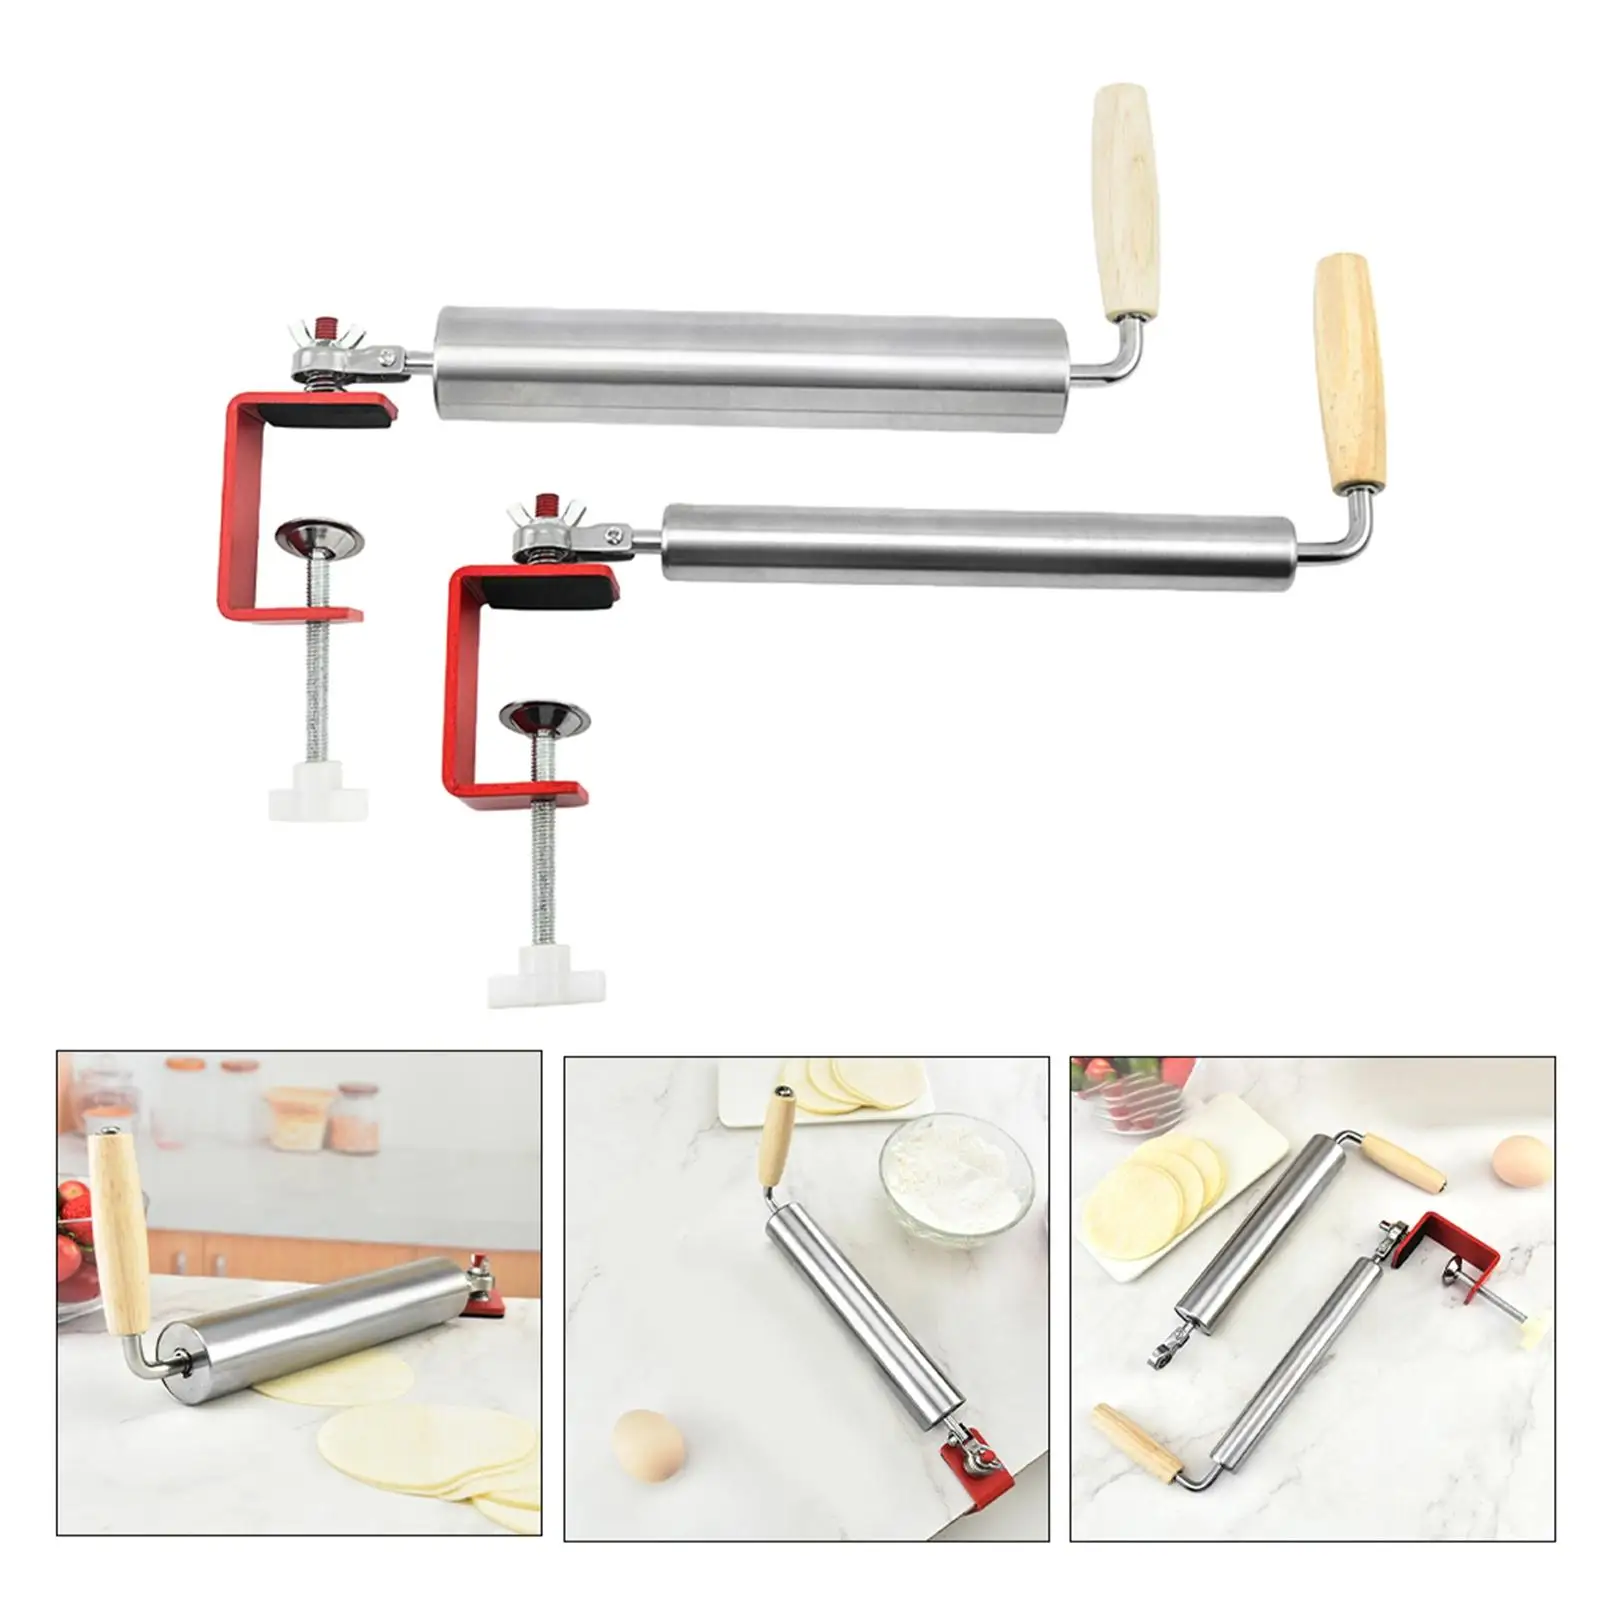 Stainless Steel Rolling Pin with Wooden Handle Fixed Bracket for Cookies Pastry Making Tool